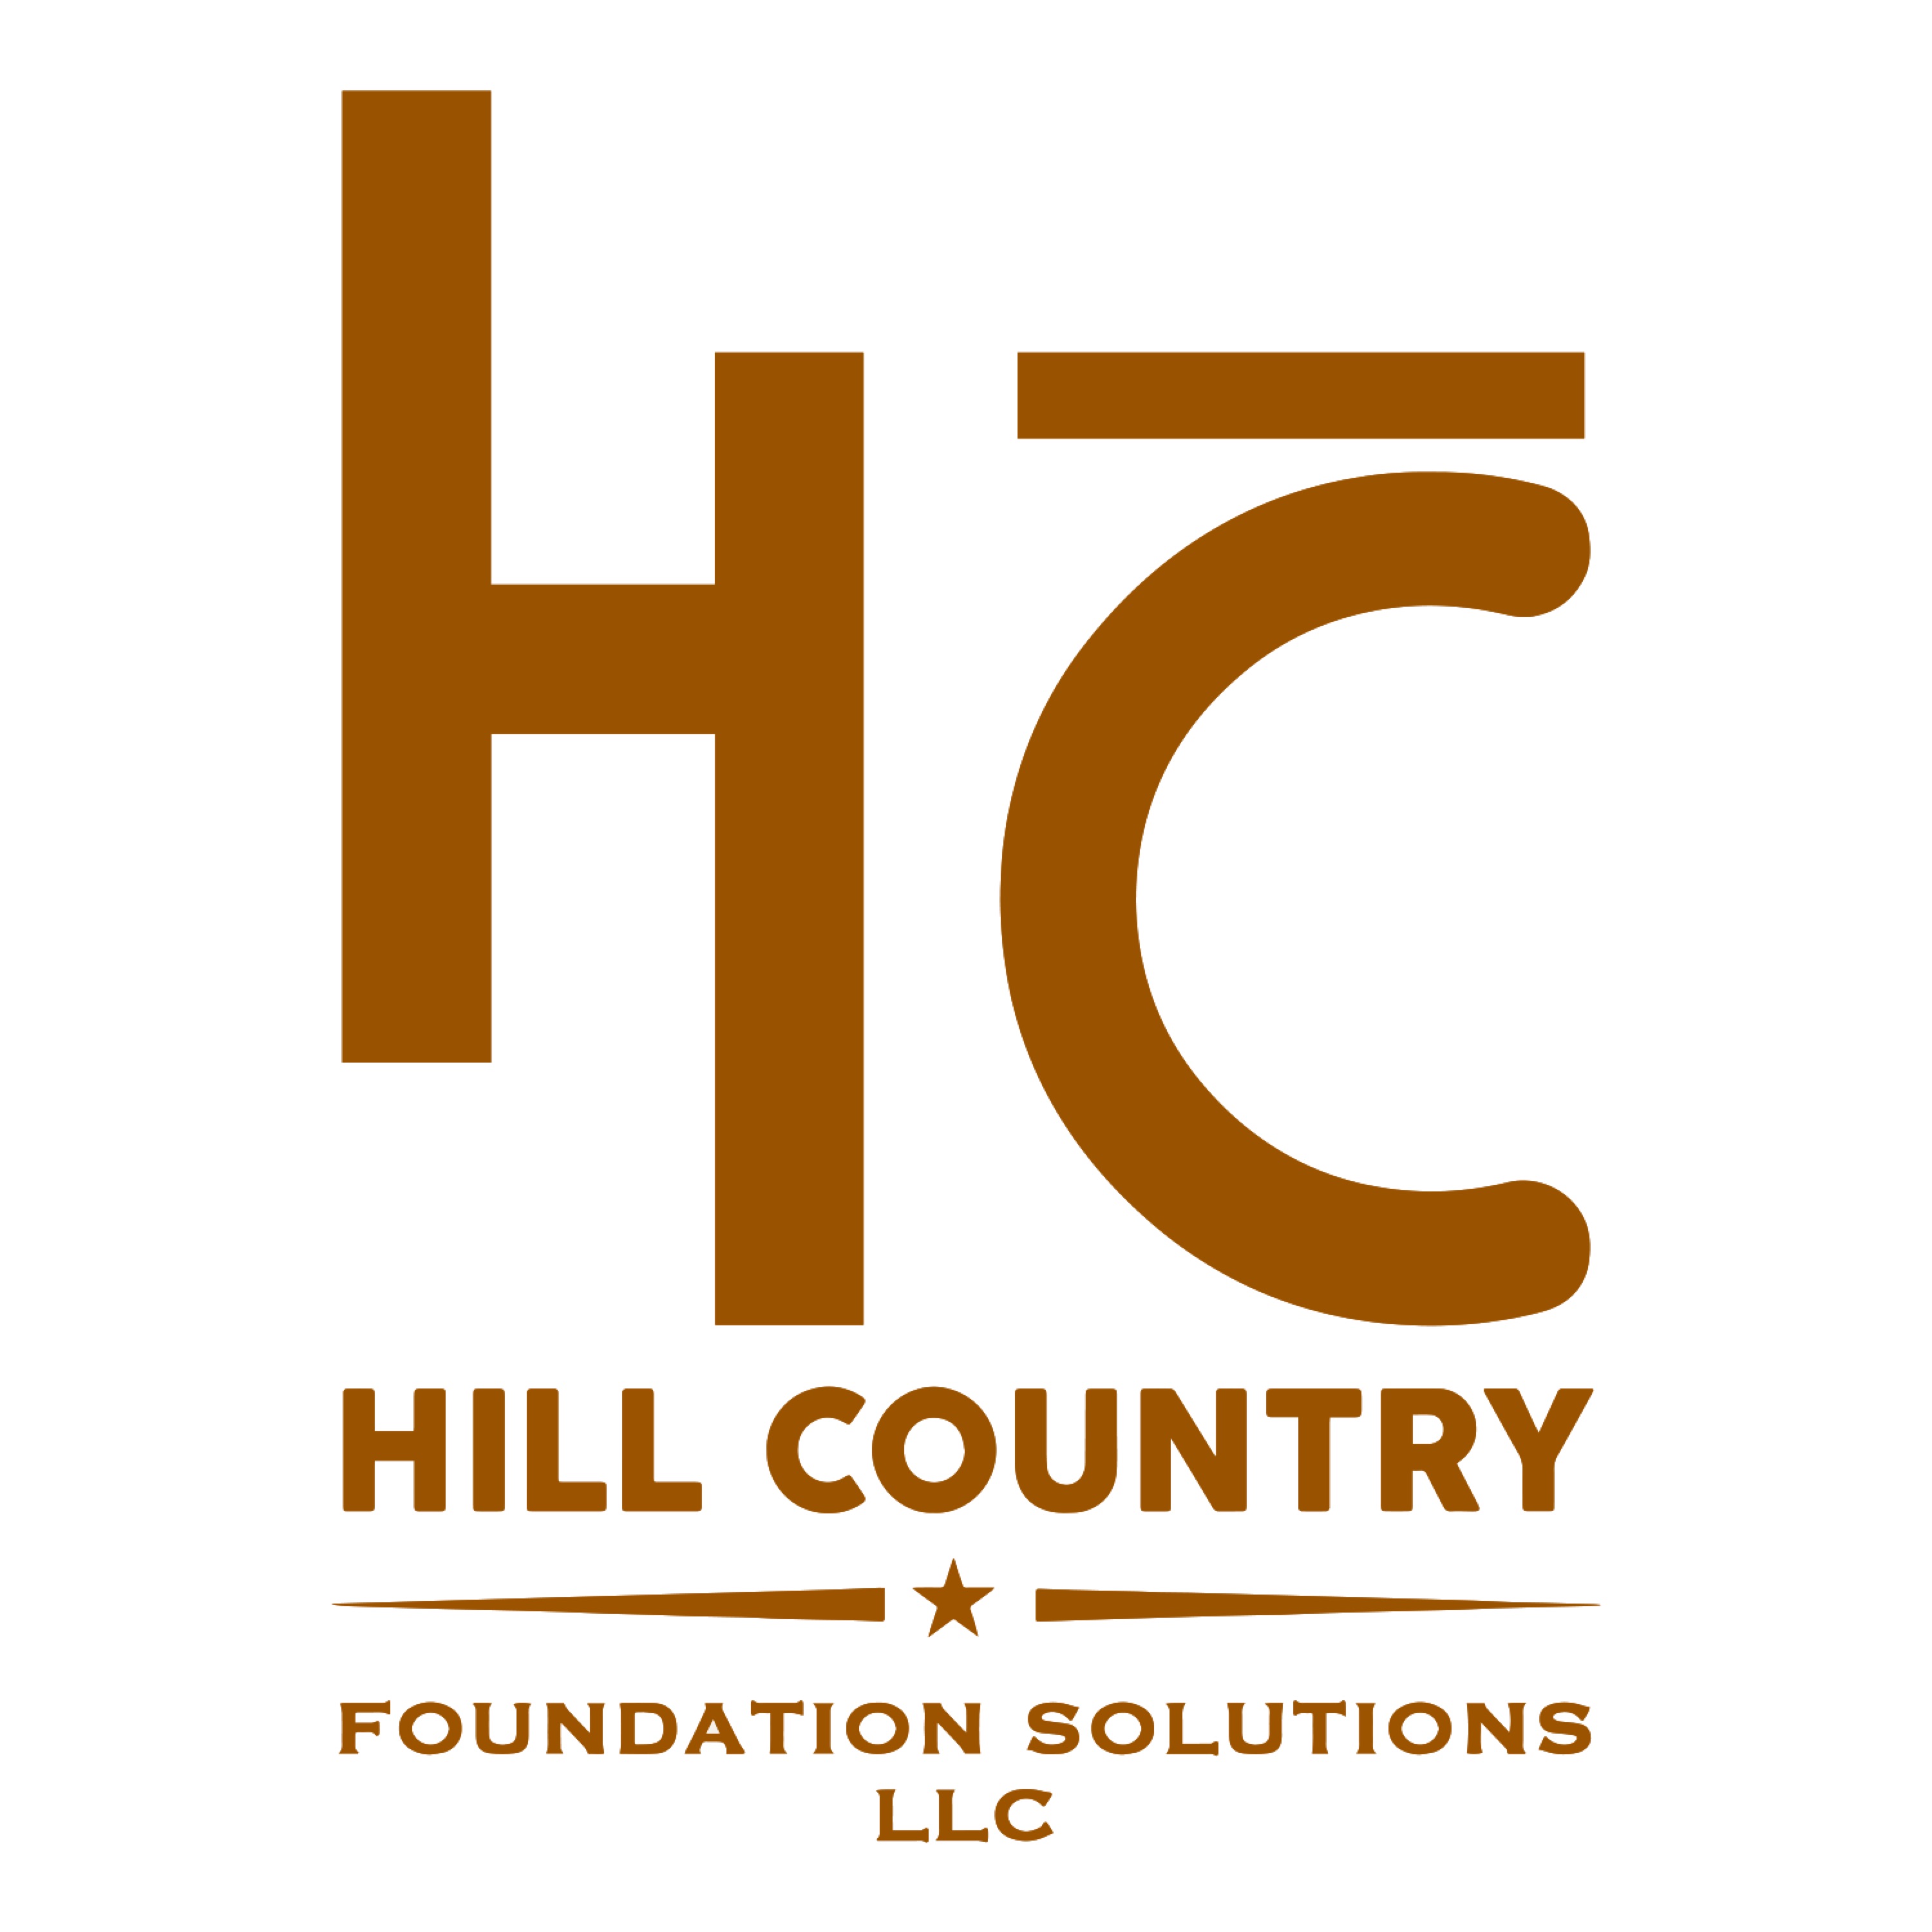 Hill Country Foundation Solutions, LLC Logo